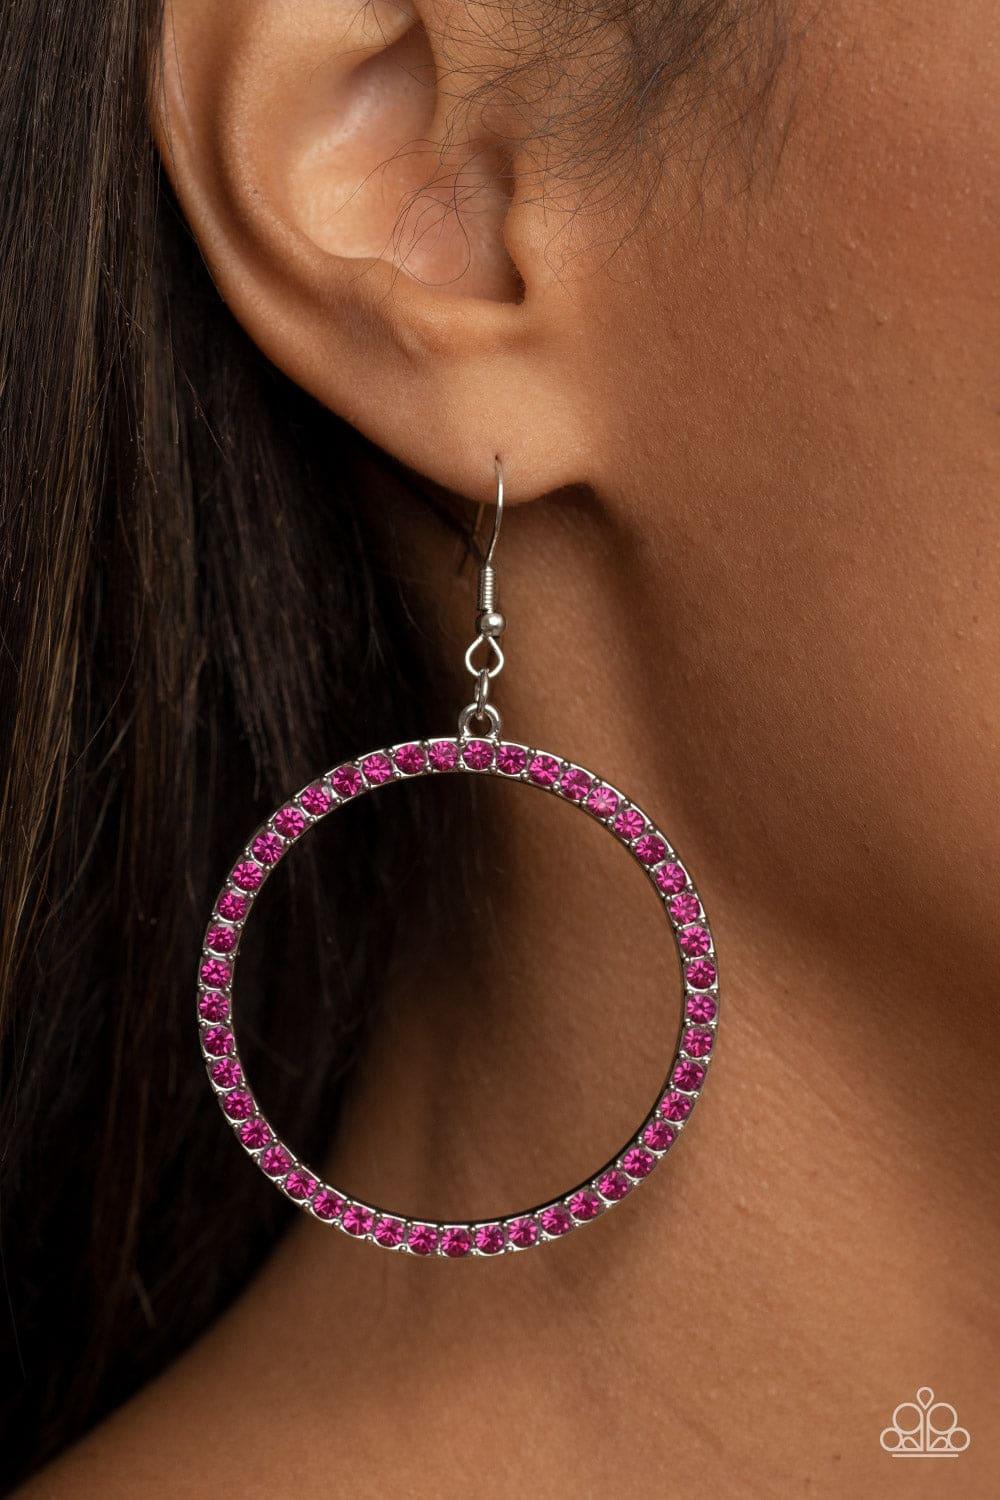 Paparazzi Accessories - Head-turning Halo - Pink Earrings - Bling by JessieK